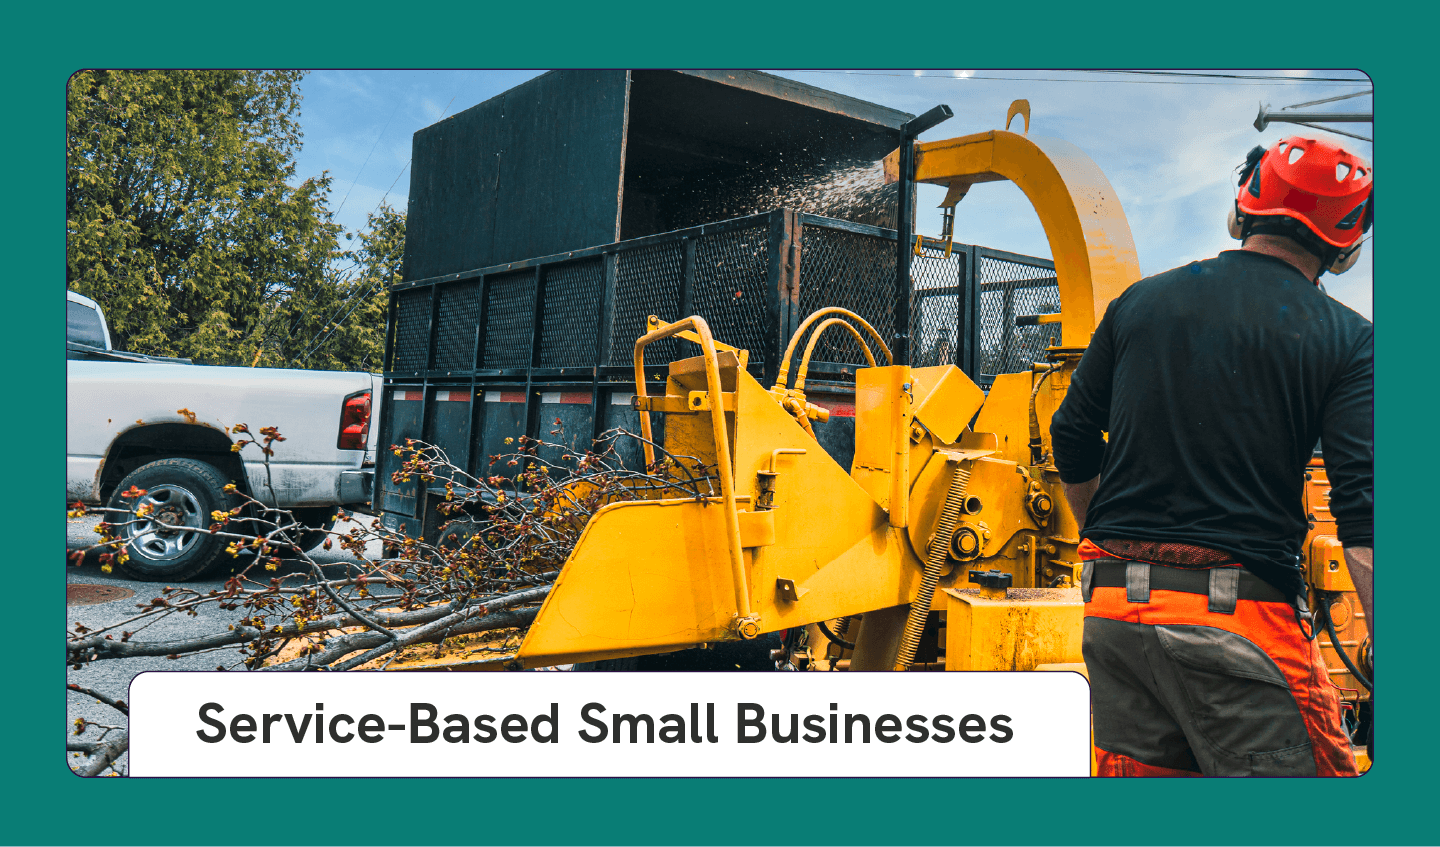 Photograph of a person feeding branches into a woodchipper as an example of a small business idea with text that says “Service-Based Small Businesses.” 